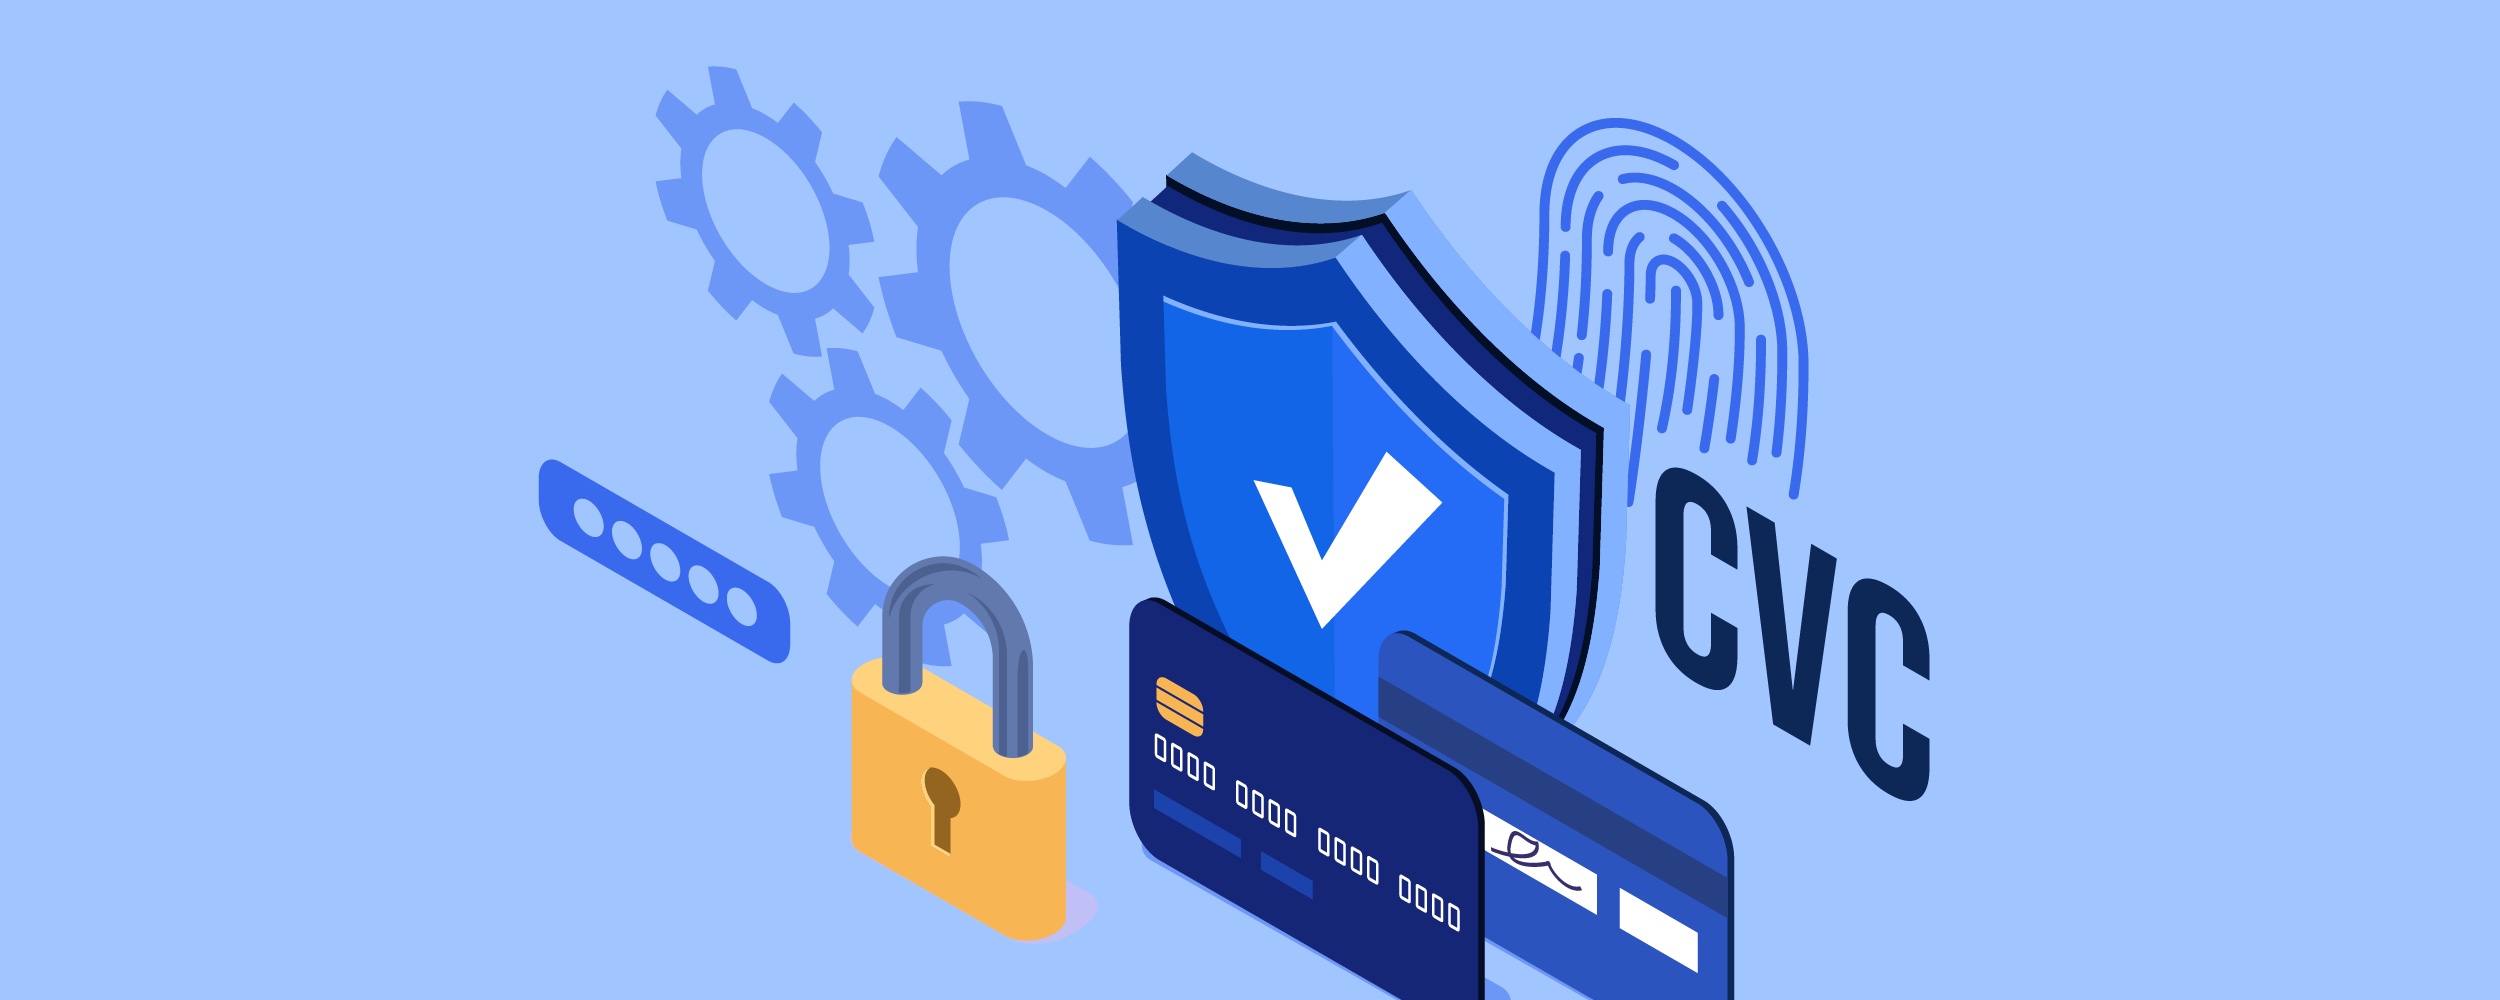 Payment Card Industry Data Security Standard – A safety feature we all benefit from…